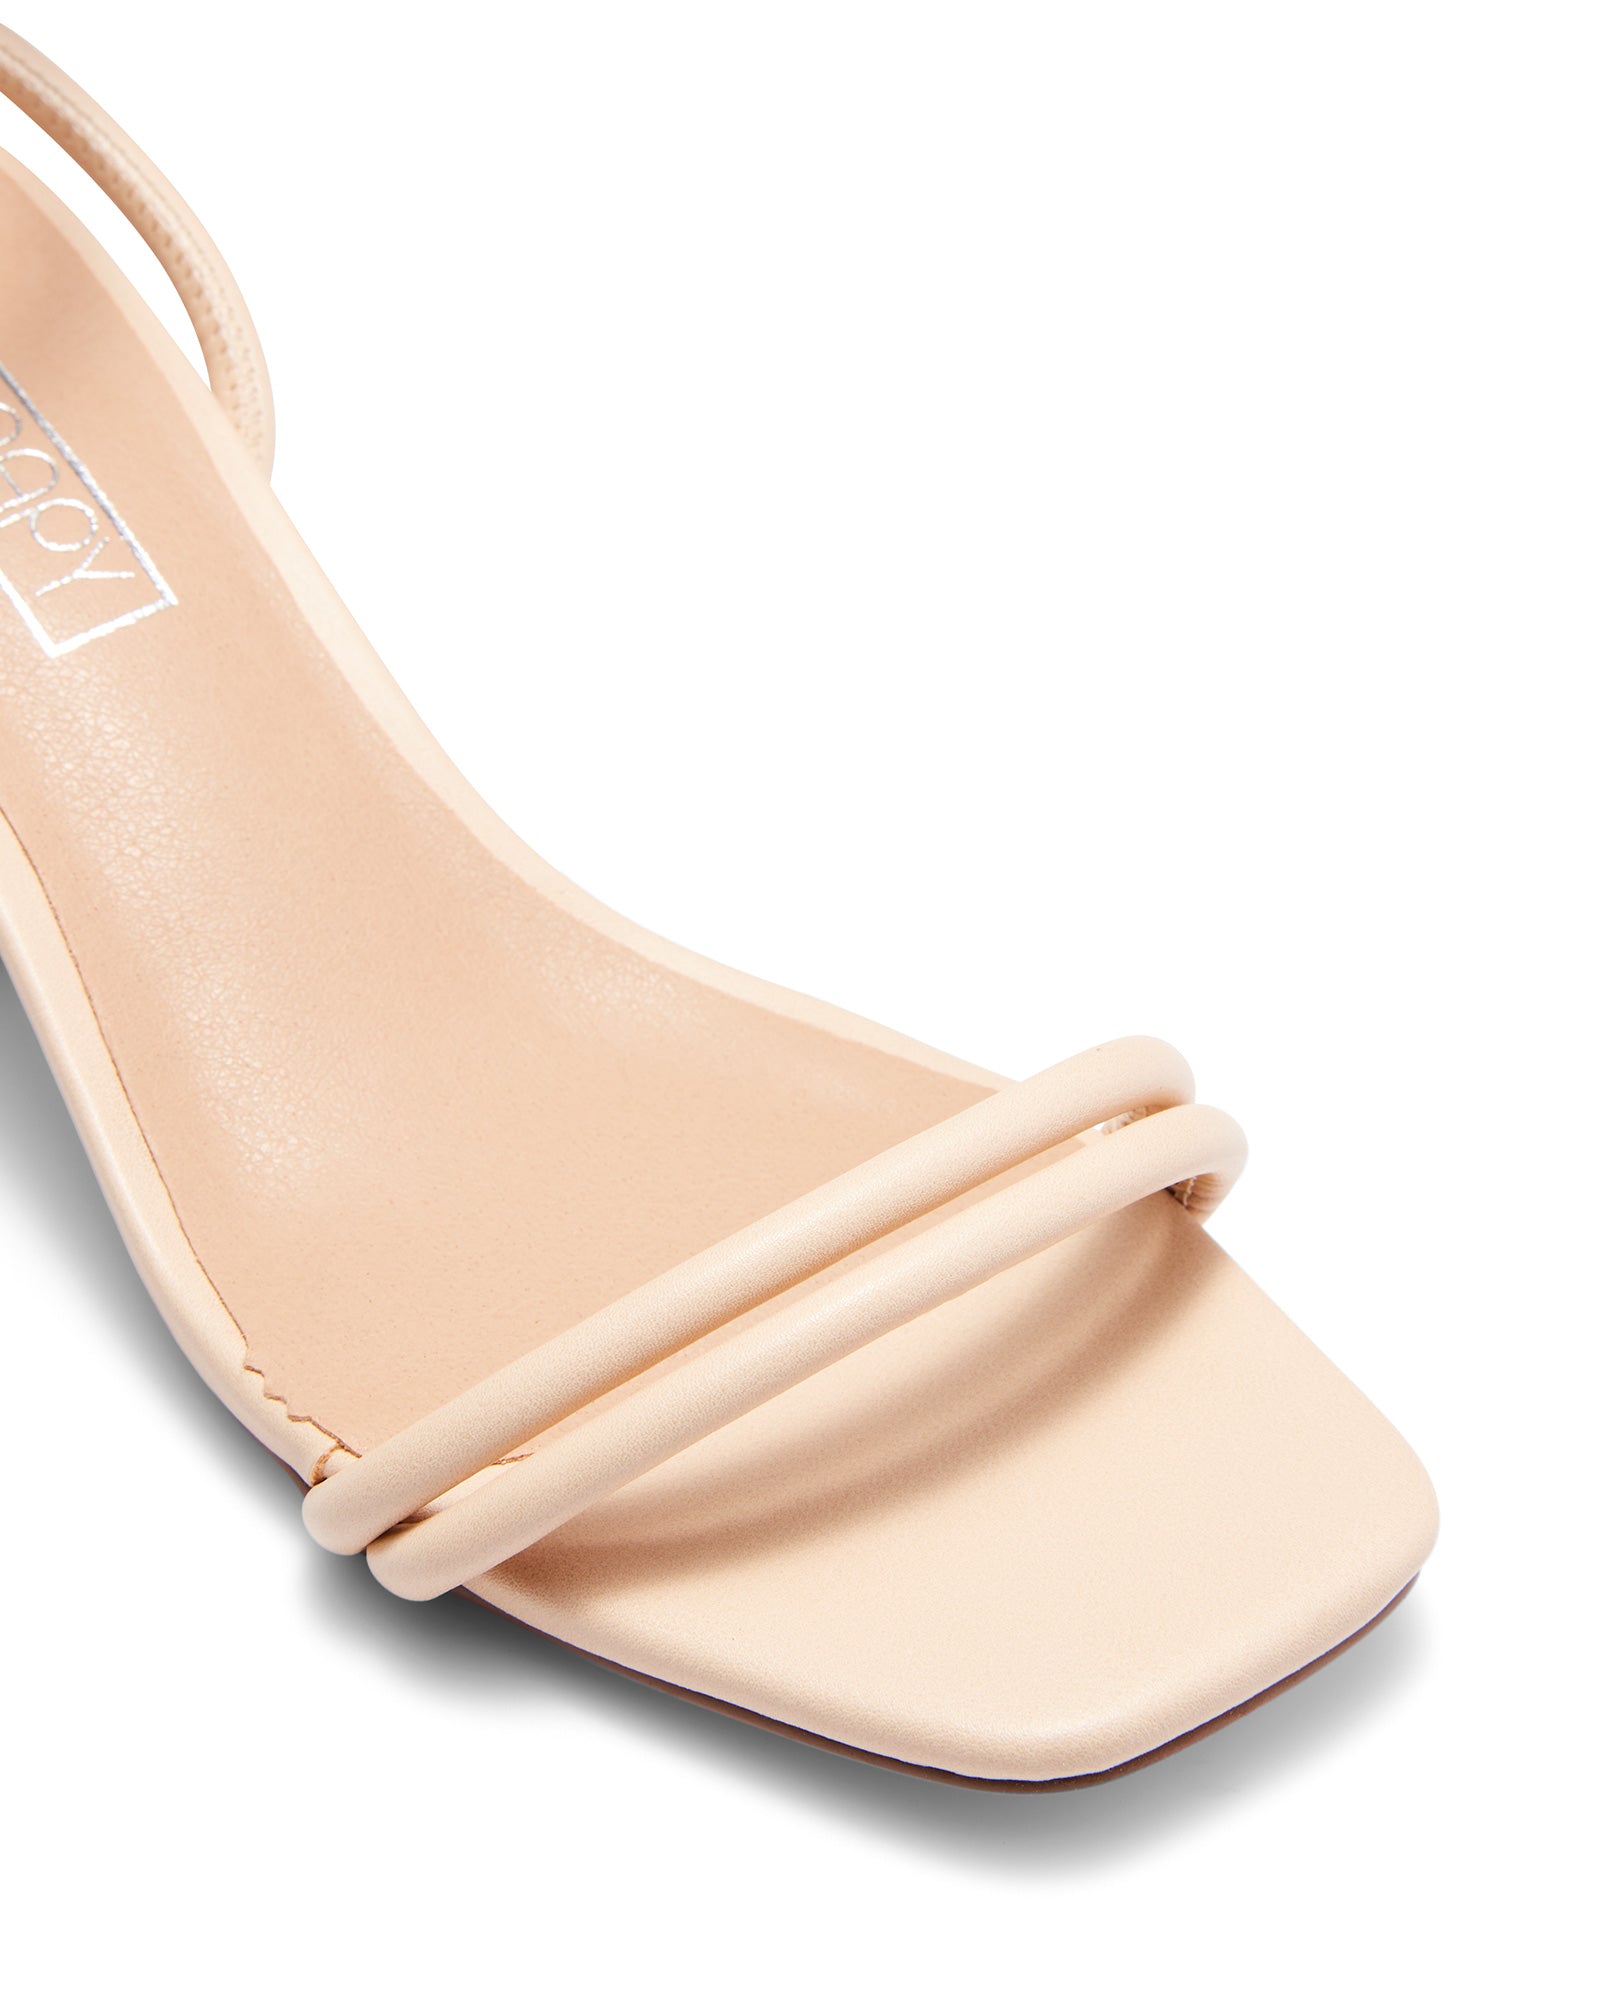 Therapy Shoes Halle Nude | Women's Heels | Sandals | Strappy | Block 